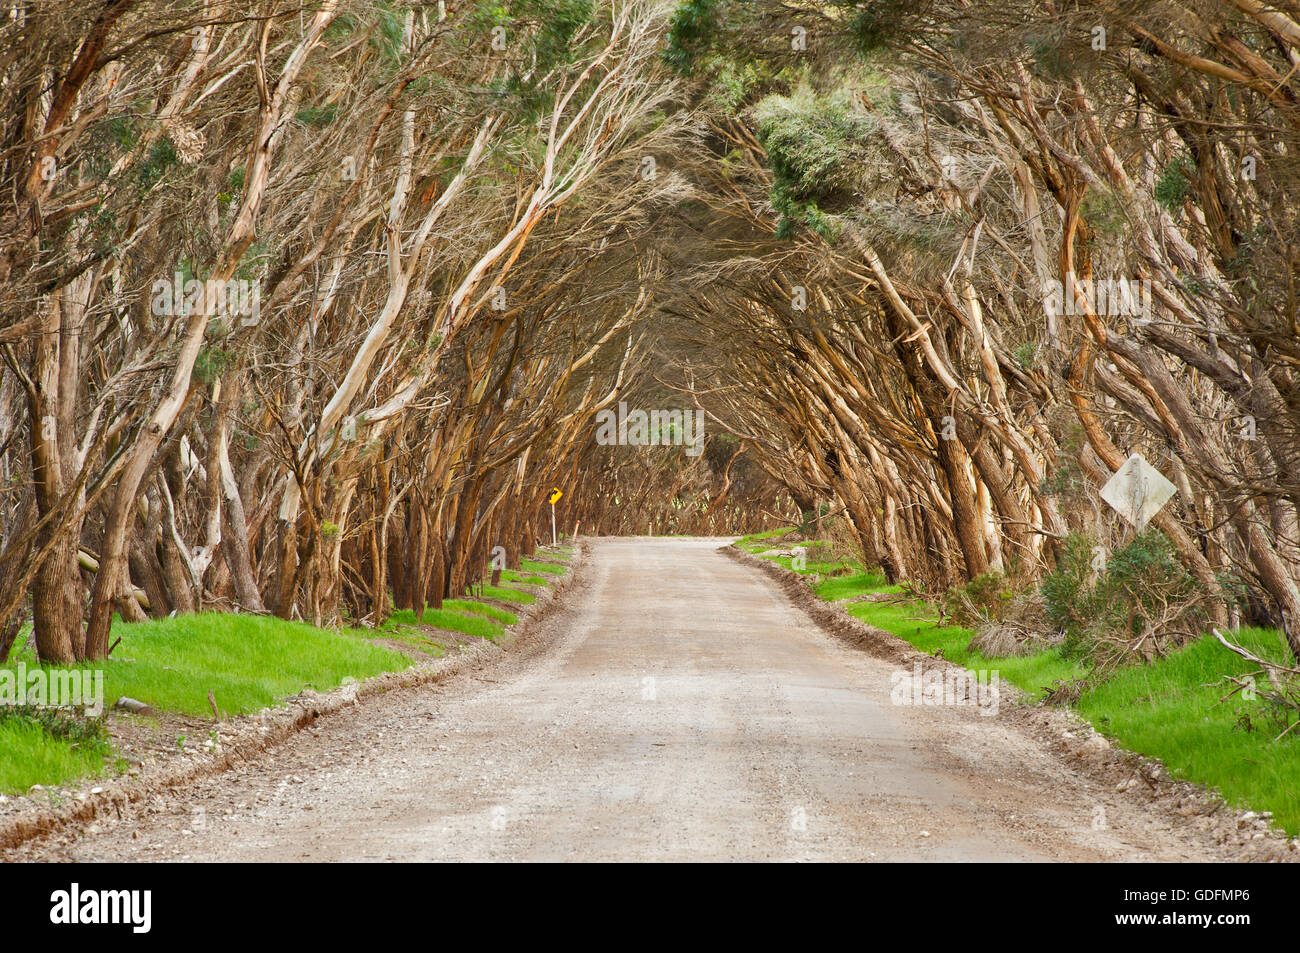 Cape Willoughby Road sur Kangaroo Island. Banque D'Images